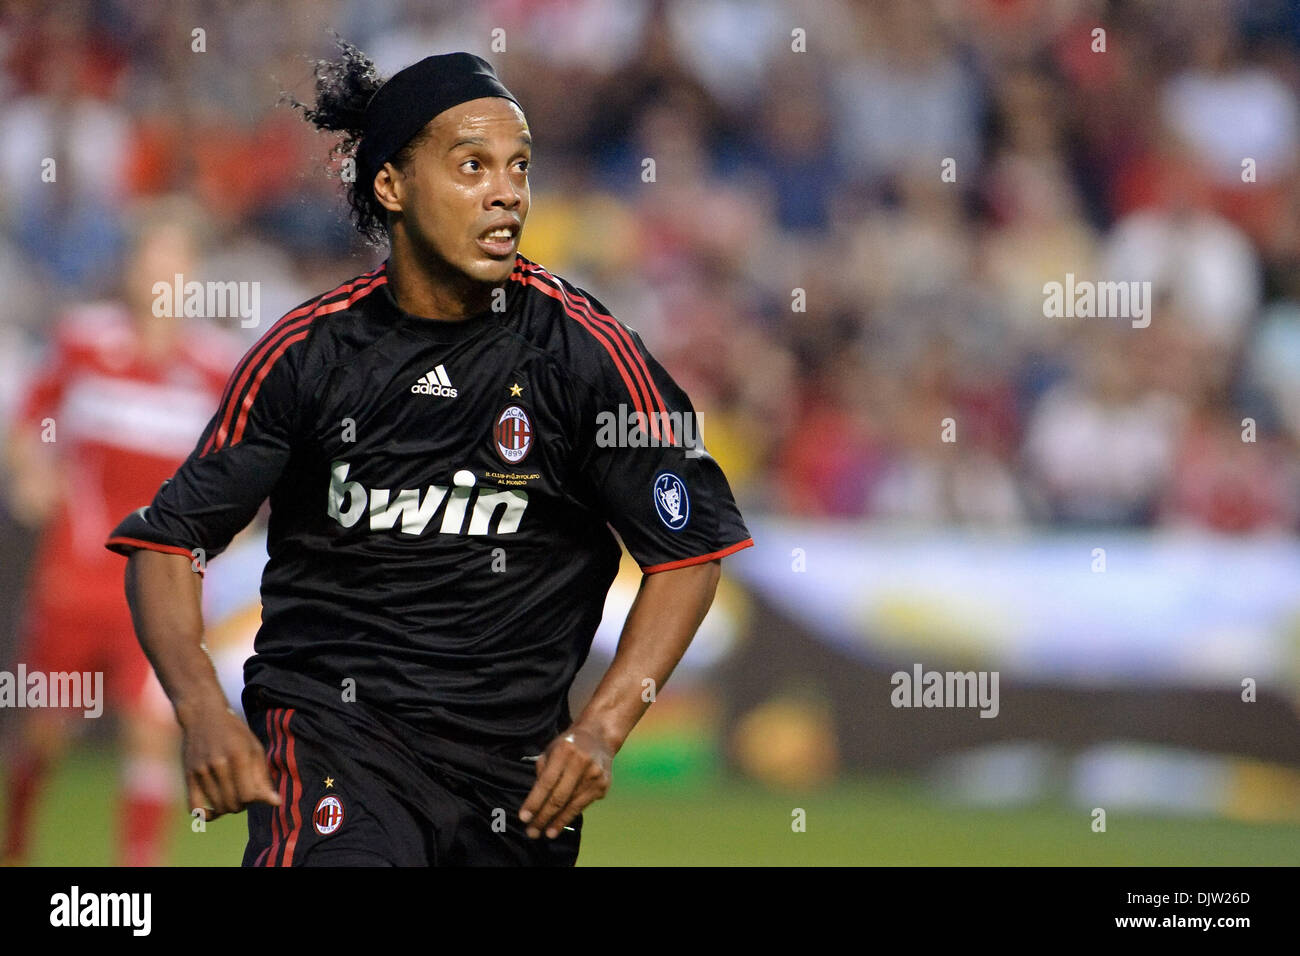 30 May2010:  AC Milan's Ronaldinho (80) during the friendly match between the Chicago Fire and AC Milan at Toyota Park in Bridgeview, Illinois.  AC Milan defeated the Fire 1-0. (Credit Image: © John Rowland/Southcreek Global/ZUMApress.com) Stock Photo